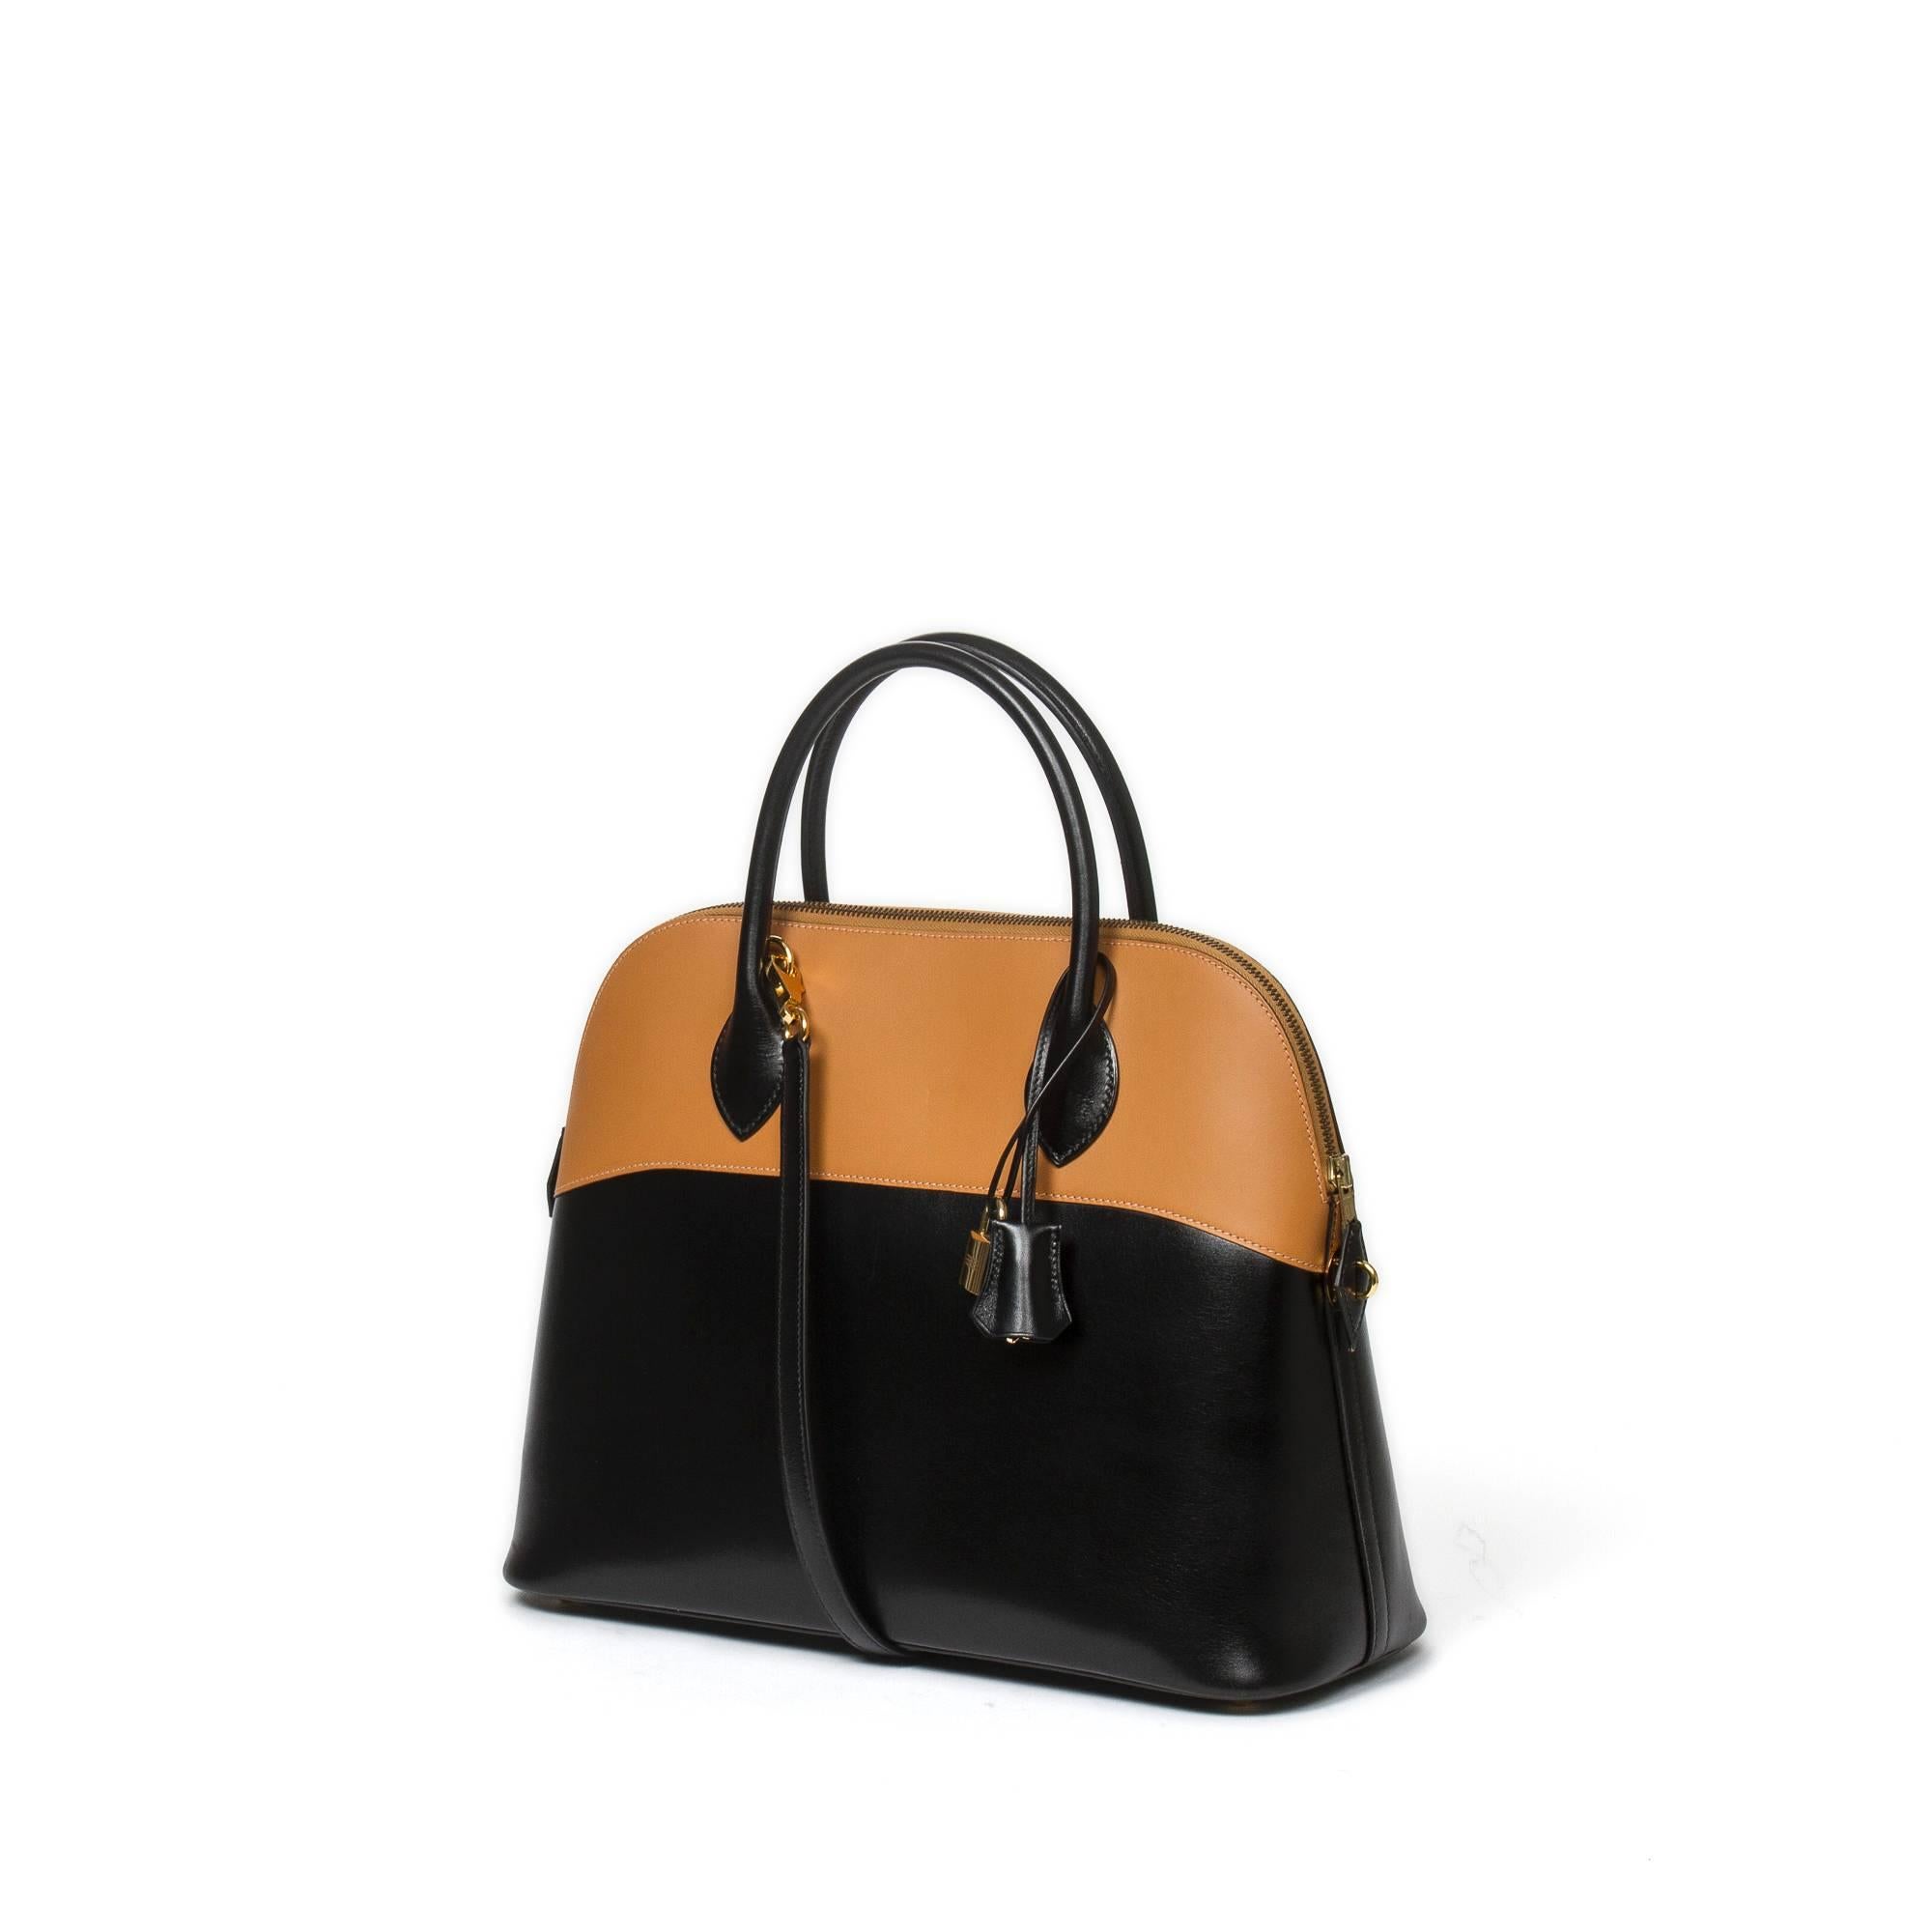 Hermès Bolide Bicolor 35cm in black Box and gold Chamonix leather with black leather handles (9cm), black leather strap (40cm), cadenas and keys in clochette and gold tone hardware. Black leather interior with one slip pocket. Pouch for